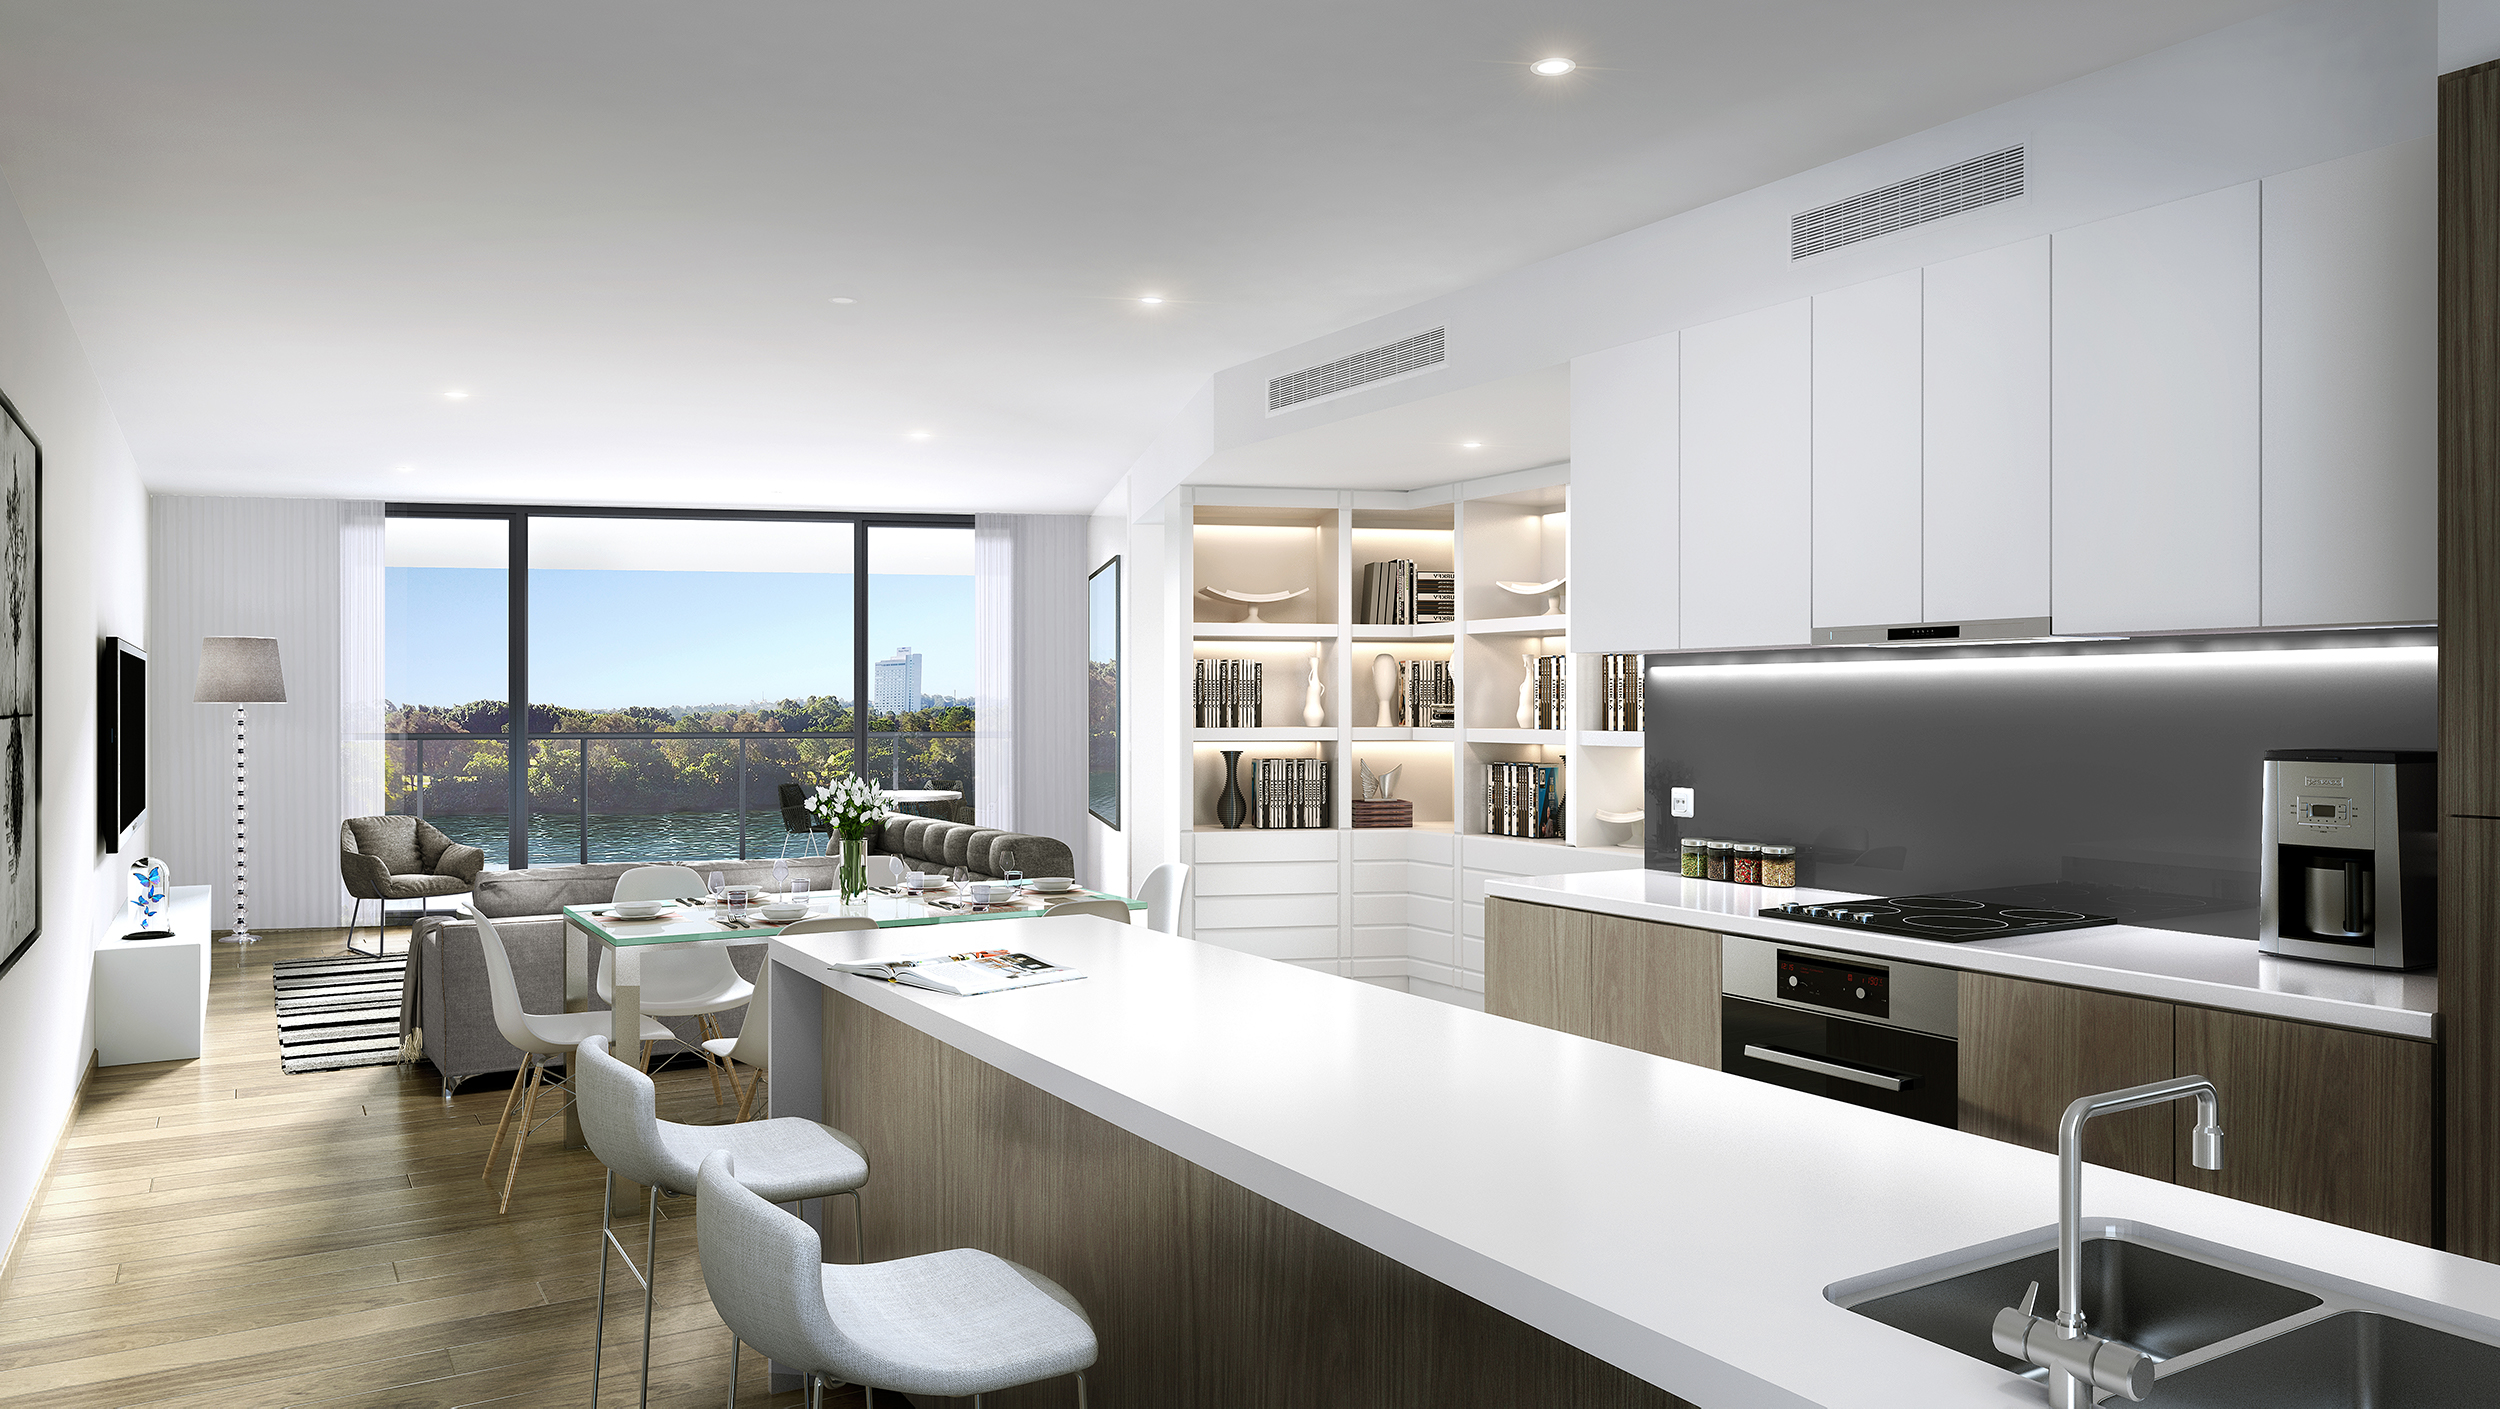 Kitchen of a riverfront residences kitchen showcasing its open layout and light colour scheme